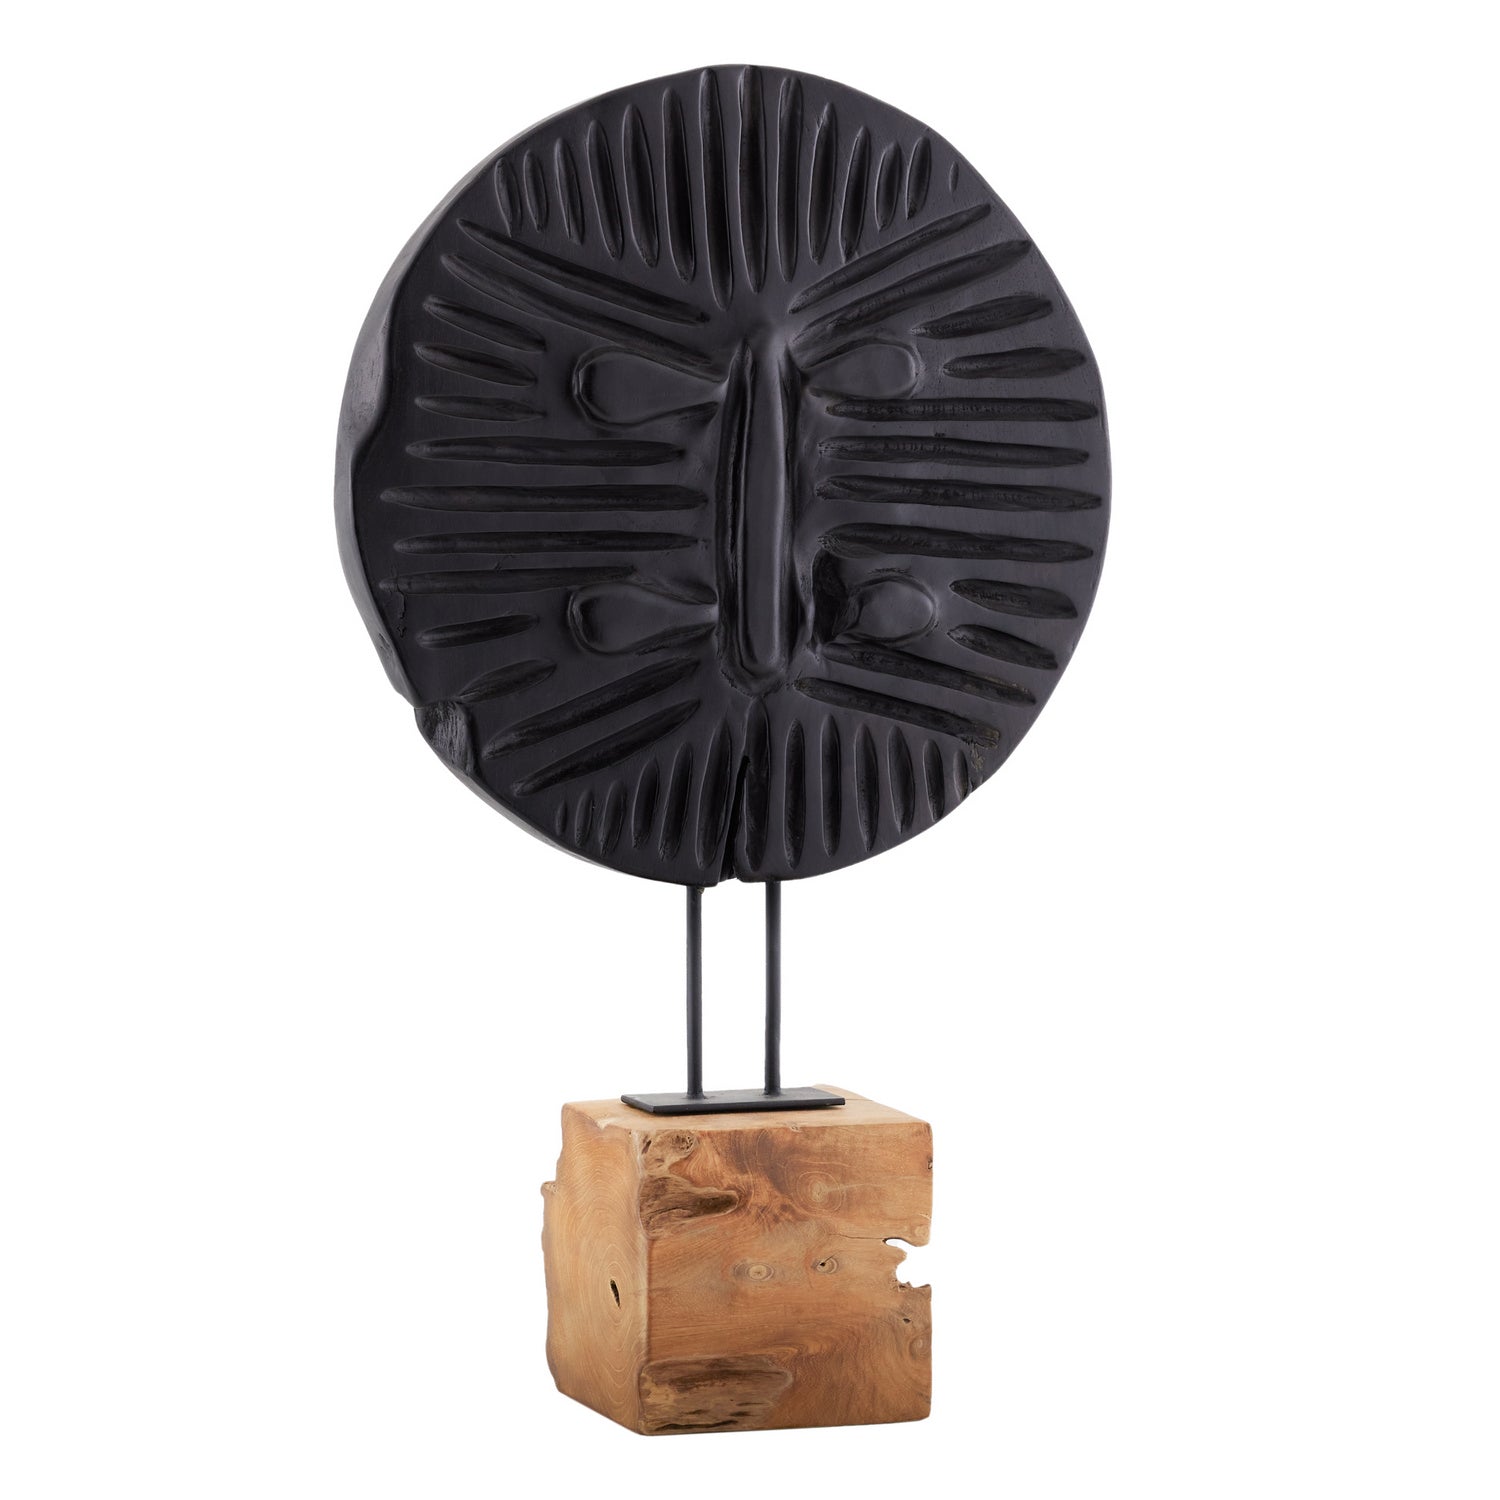 Sculpture from the Samirah collection in Ebony finish